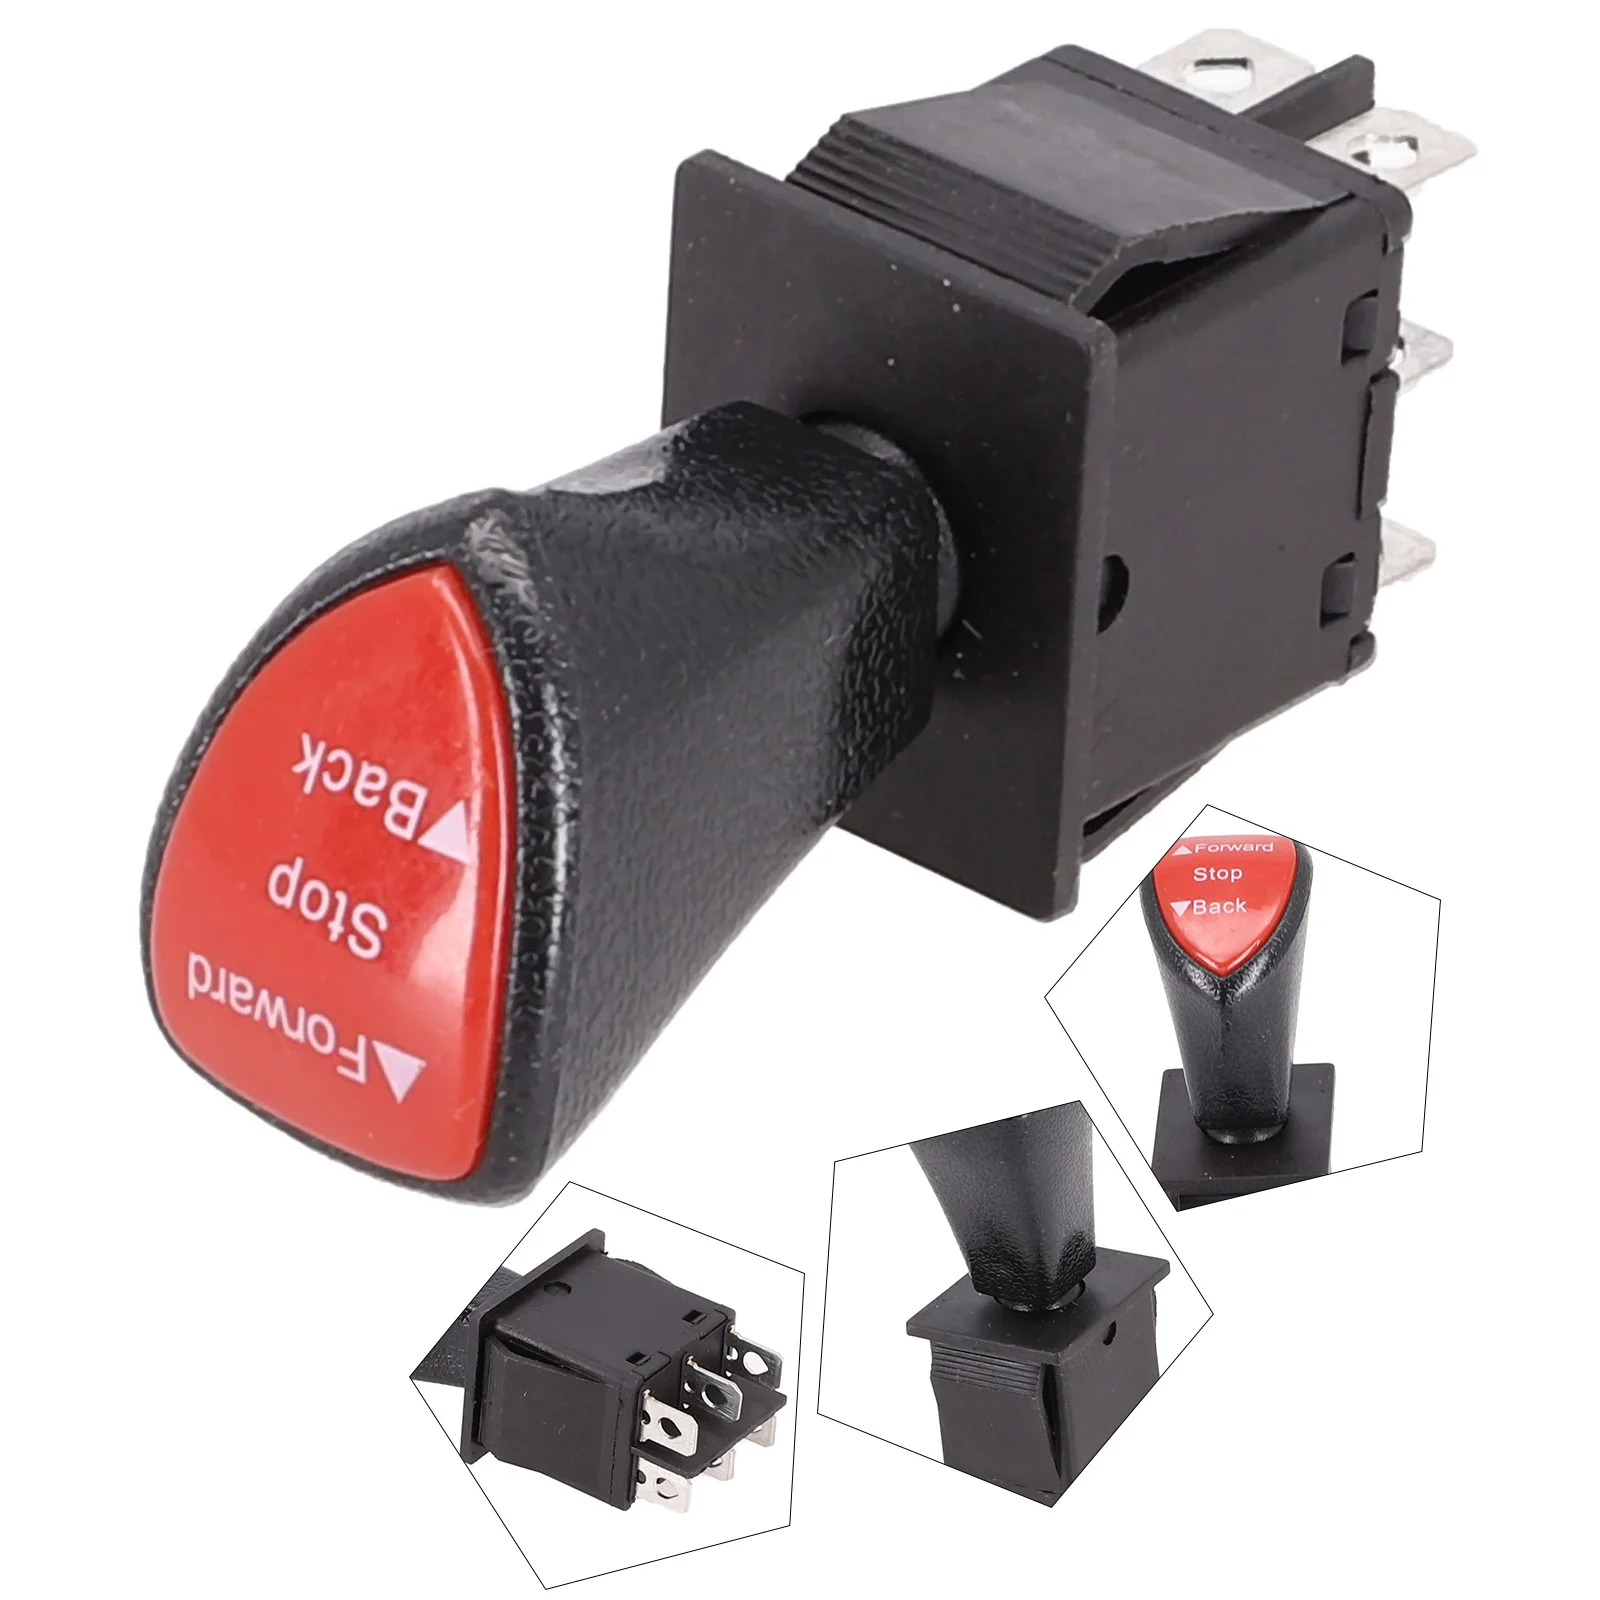 

1pc Forward-Stop-Back DPDT 6Pin Latching Slide Rocker Switch KCD4-604-6P 125V 250V Auto Interior Switches Replacement